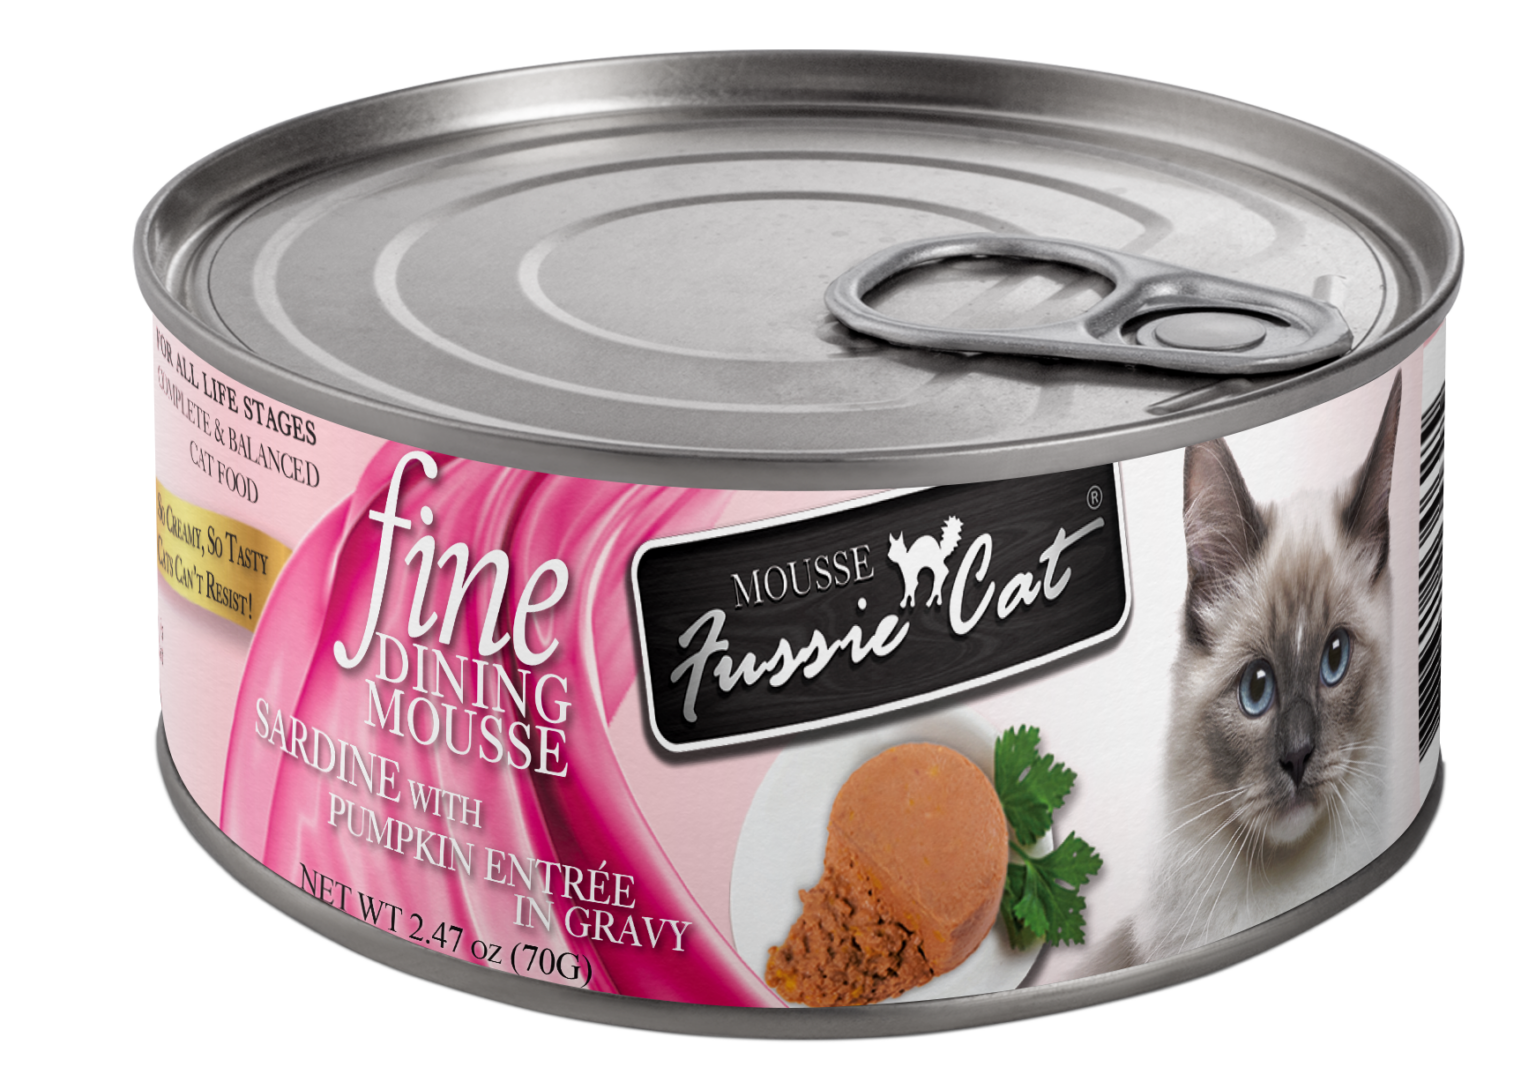 Fussie Cat Fine Dining Canned Sardine With Pumpkin Entree 2.47oz